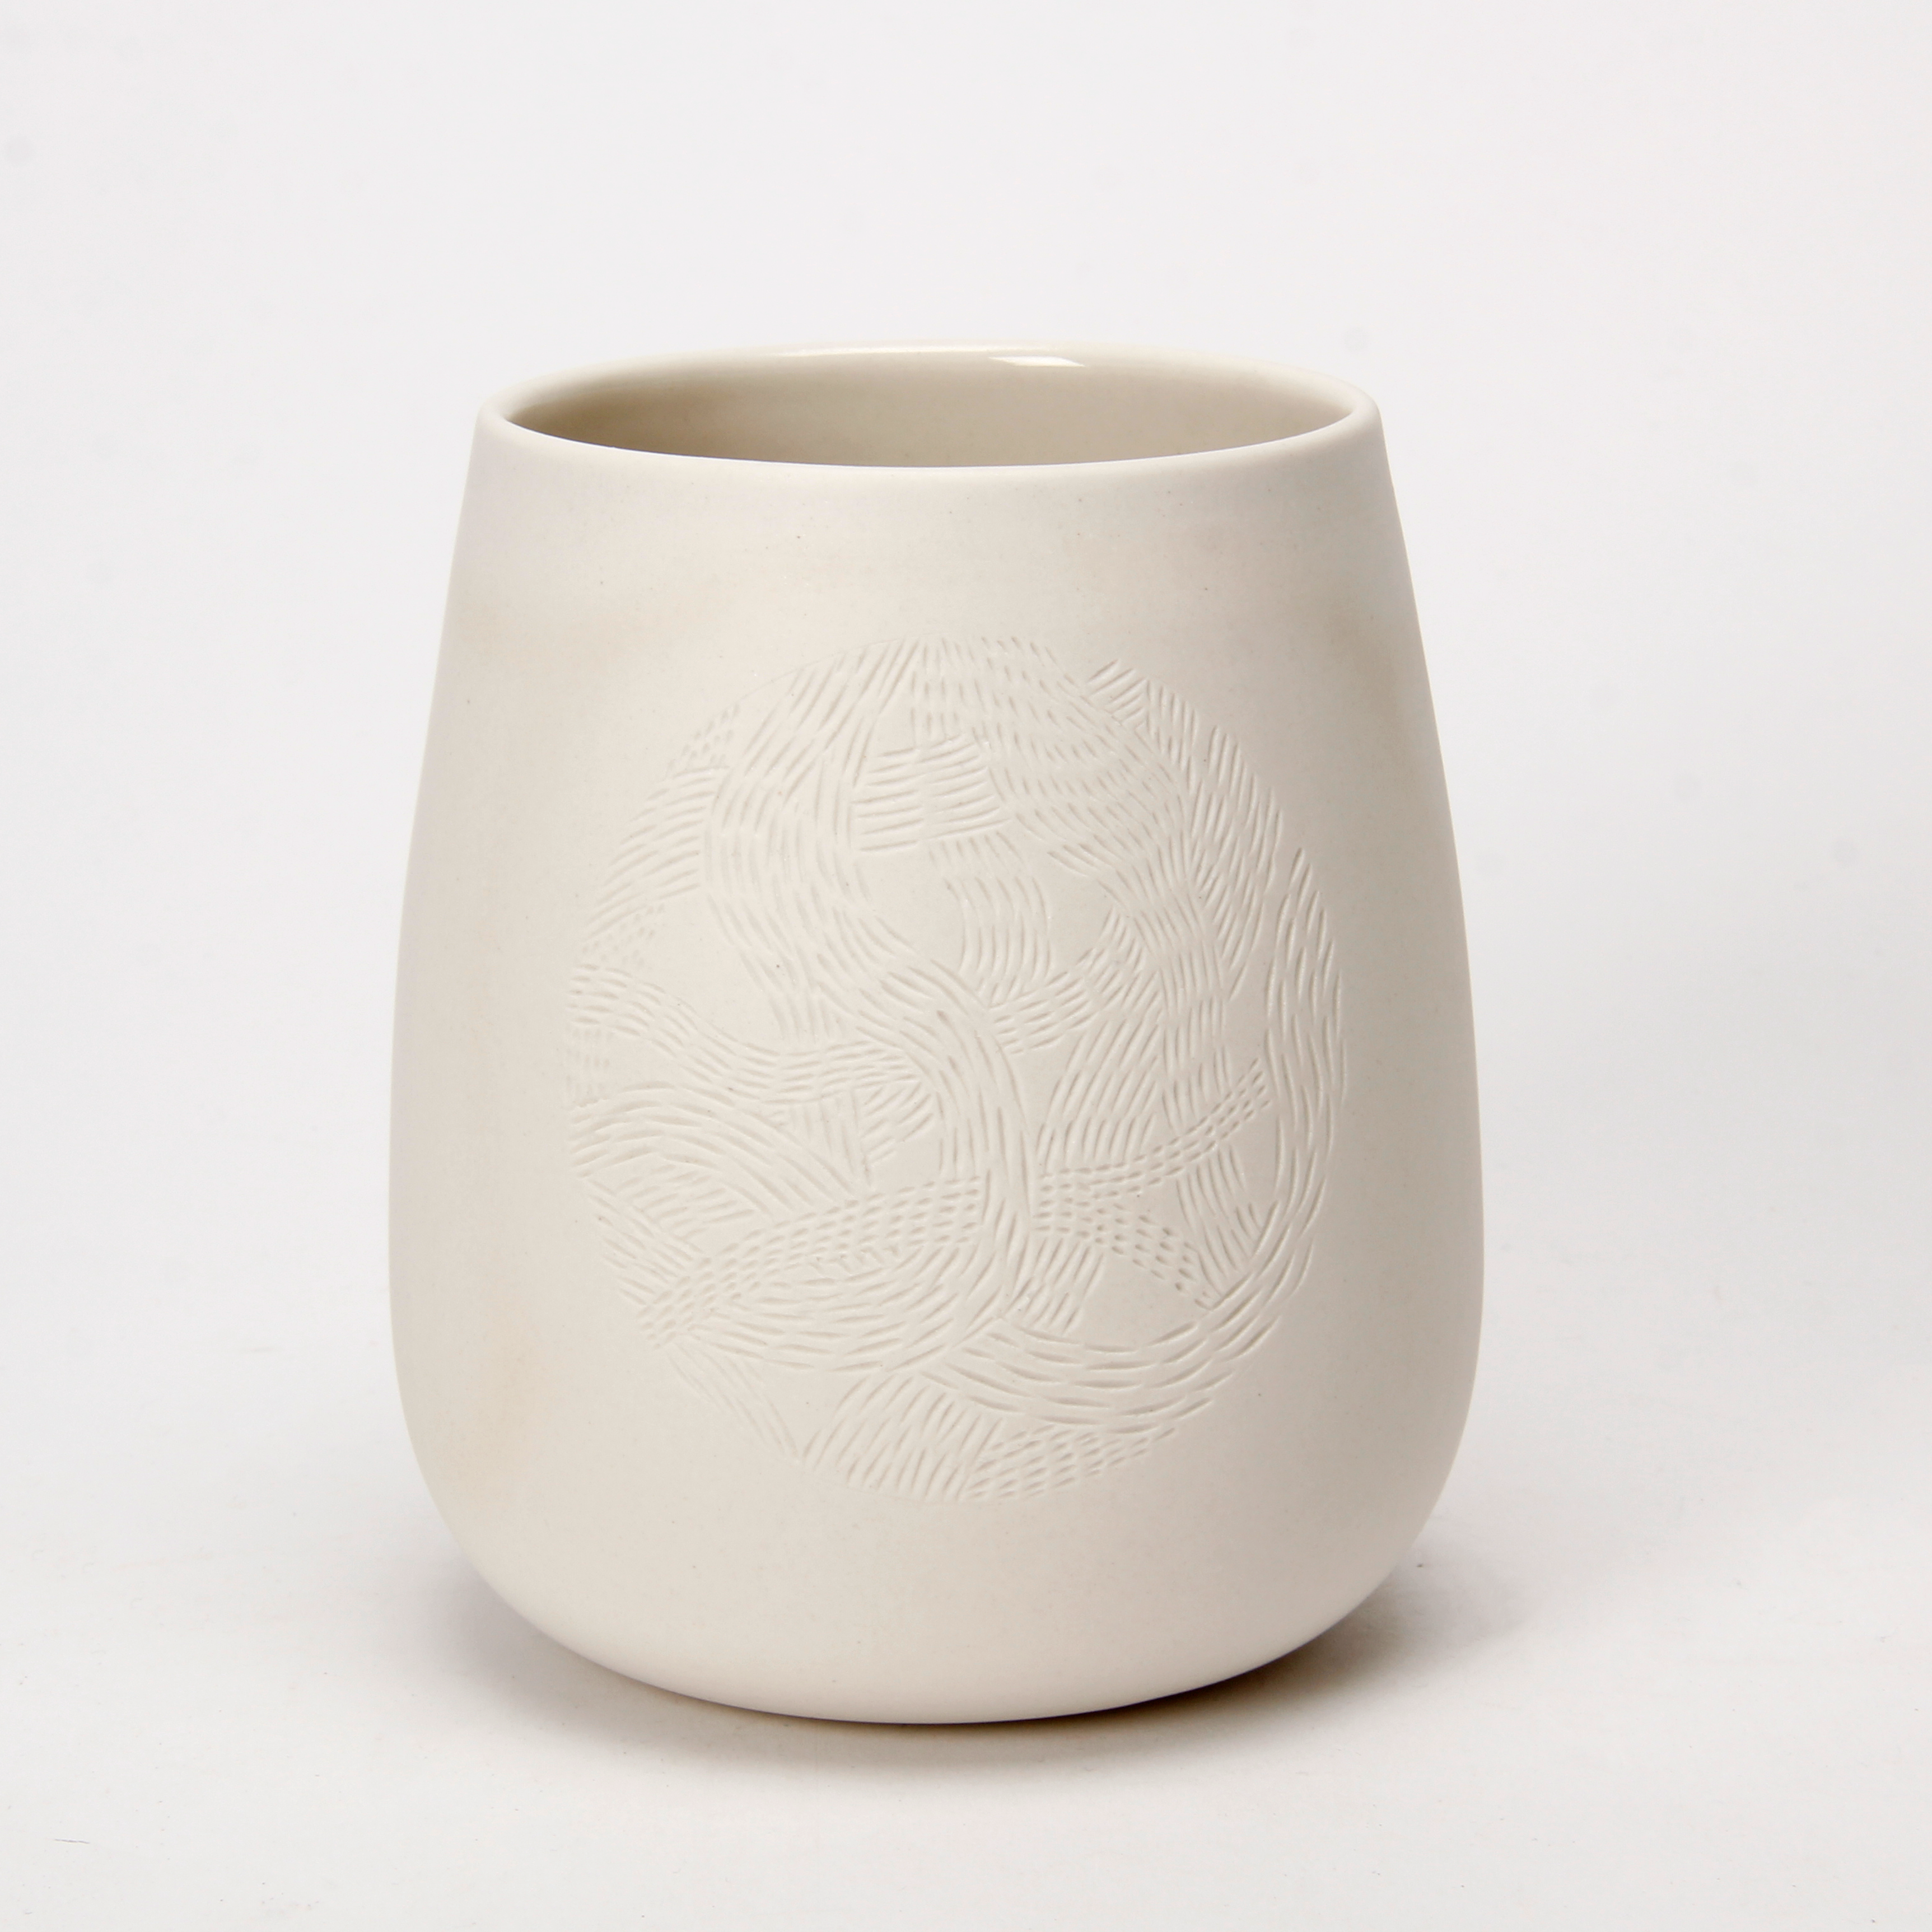 Talia Silva: Subtle Echoes – Naturally Carved Vessel Cup Product Image 1 of 2